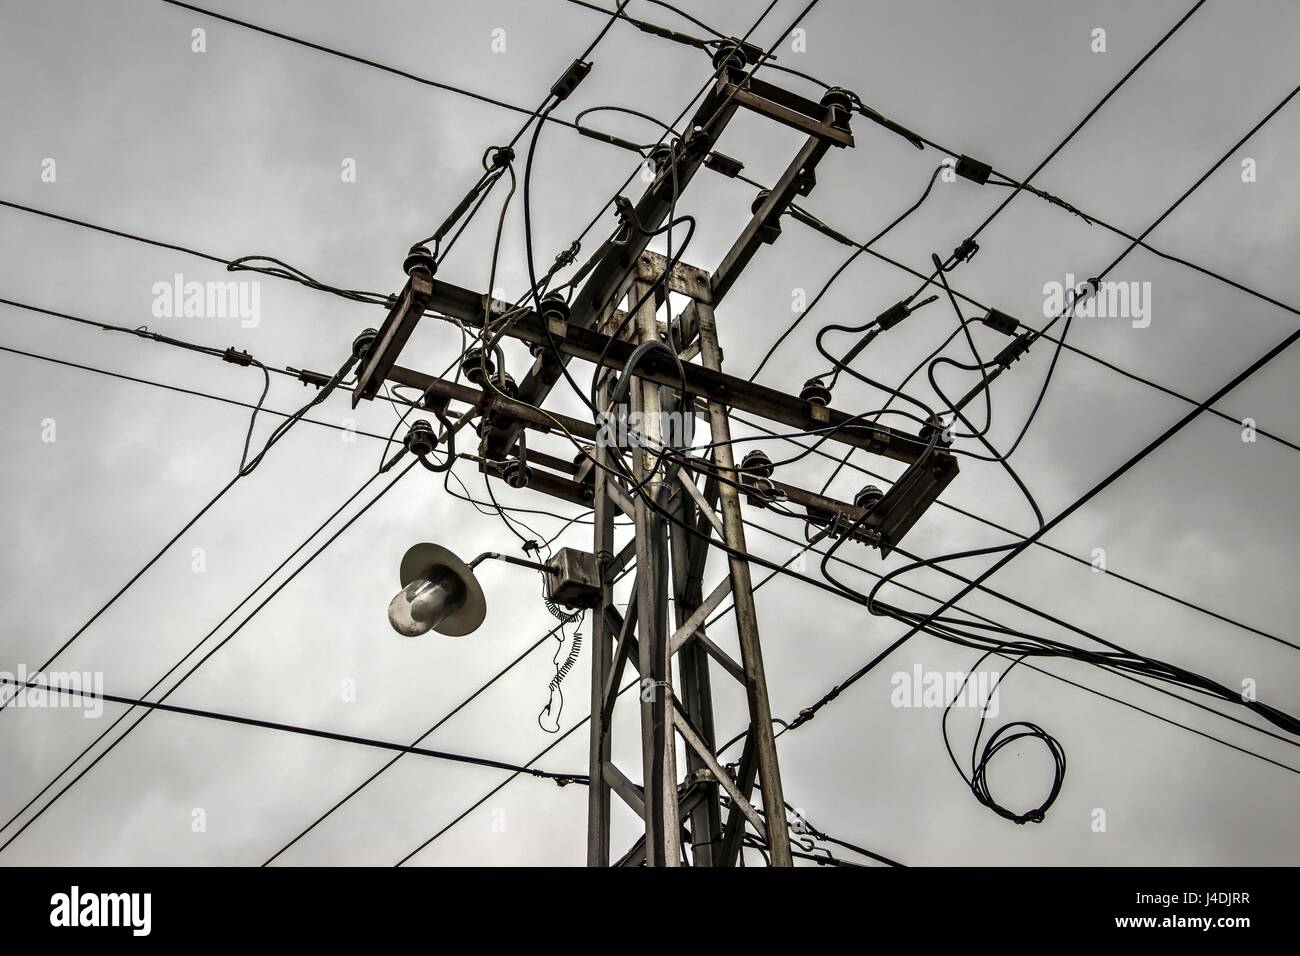 Utility power pole supporting wires Stock Photo